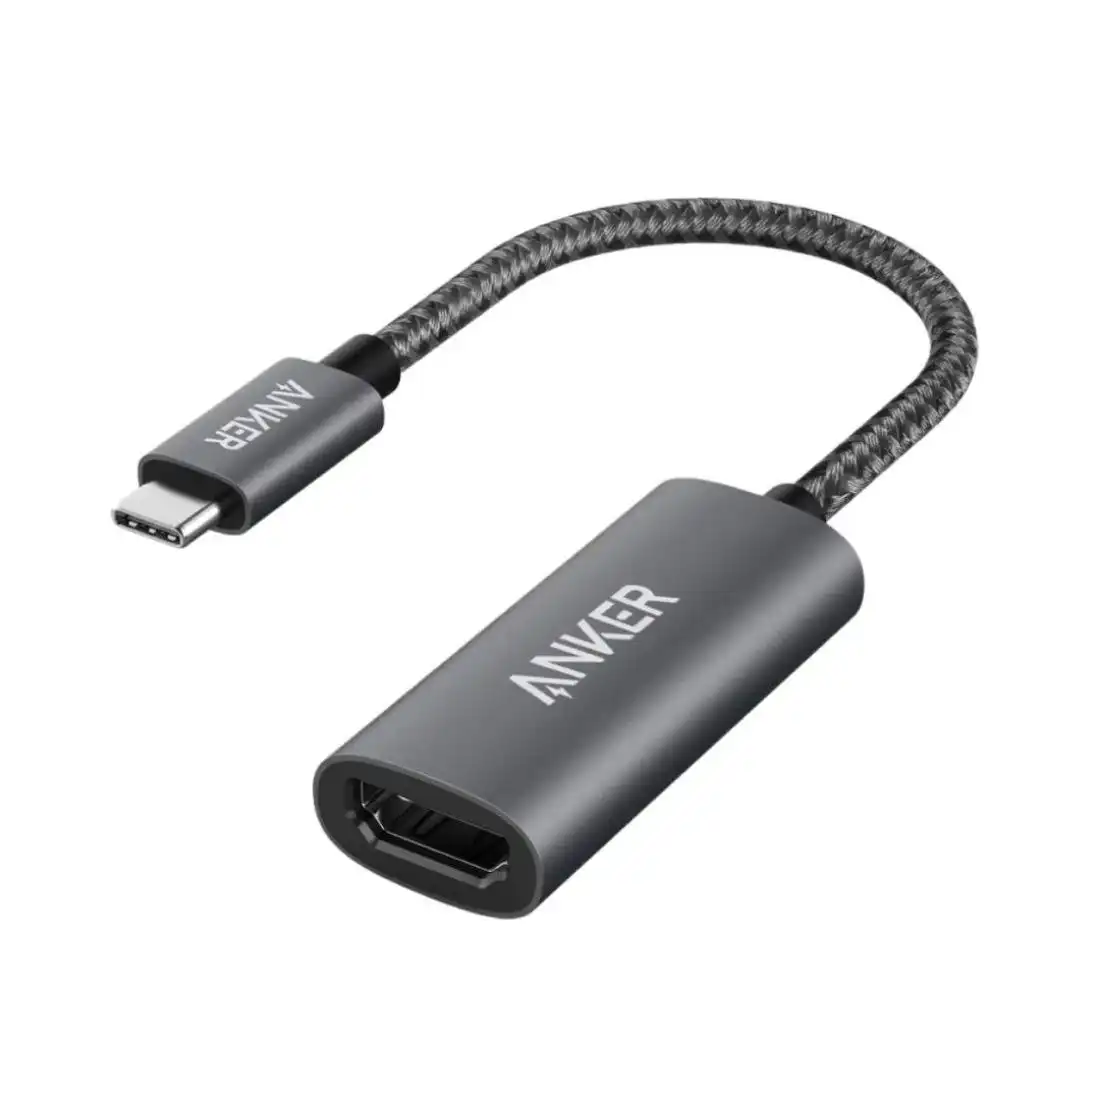 Anker 310 USB-C to HDMI Adapter - Grey